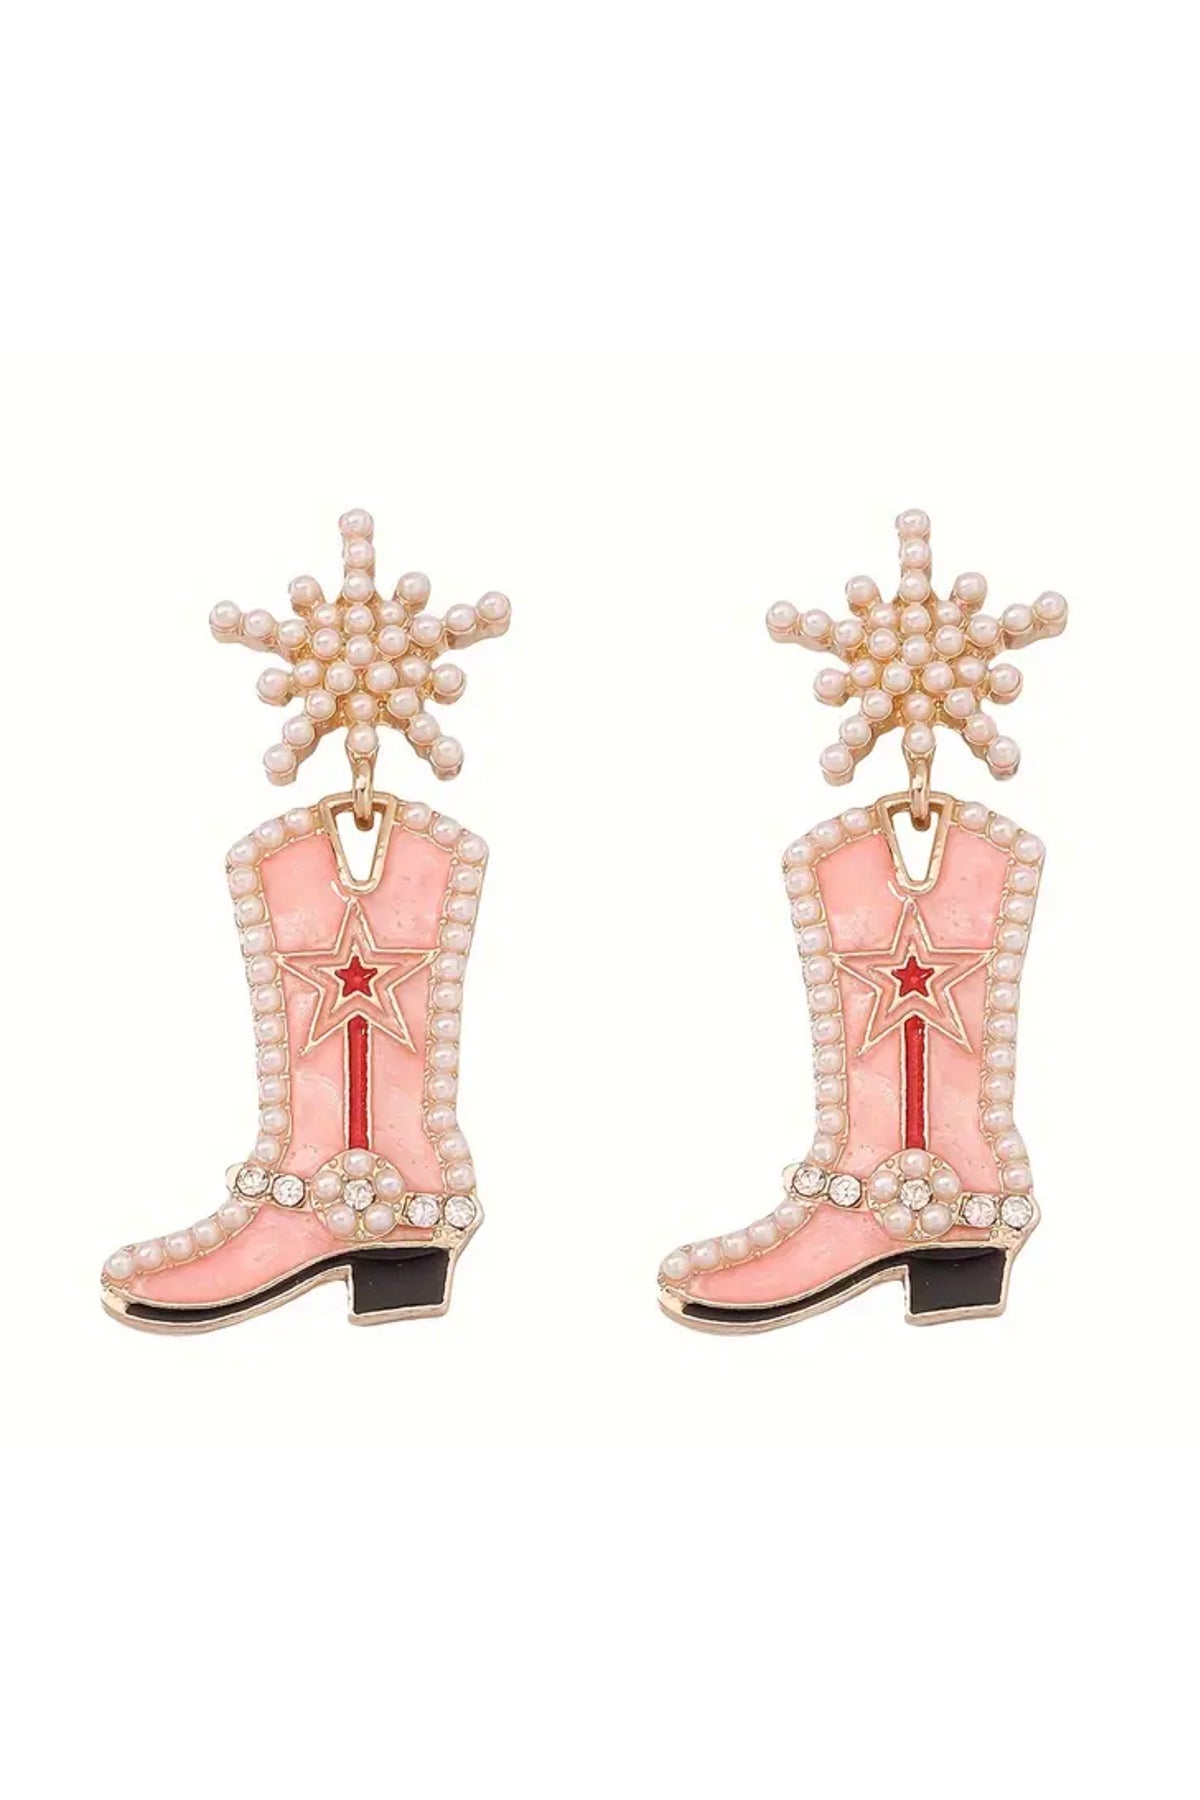 Cowgirl Boots Earring